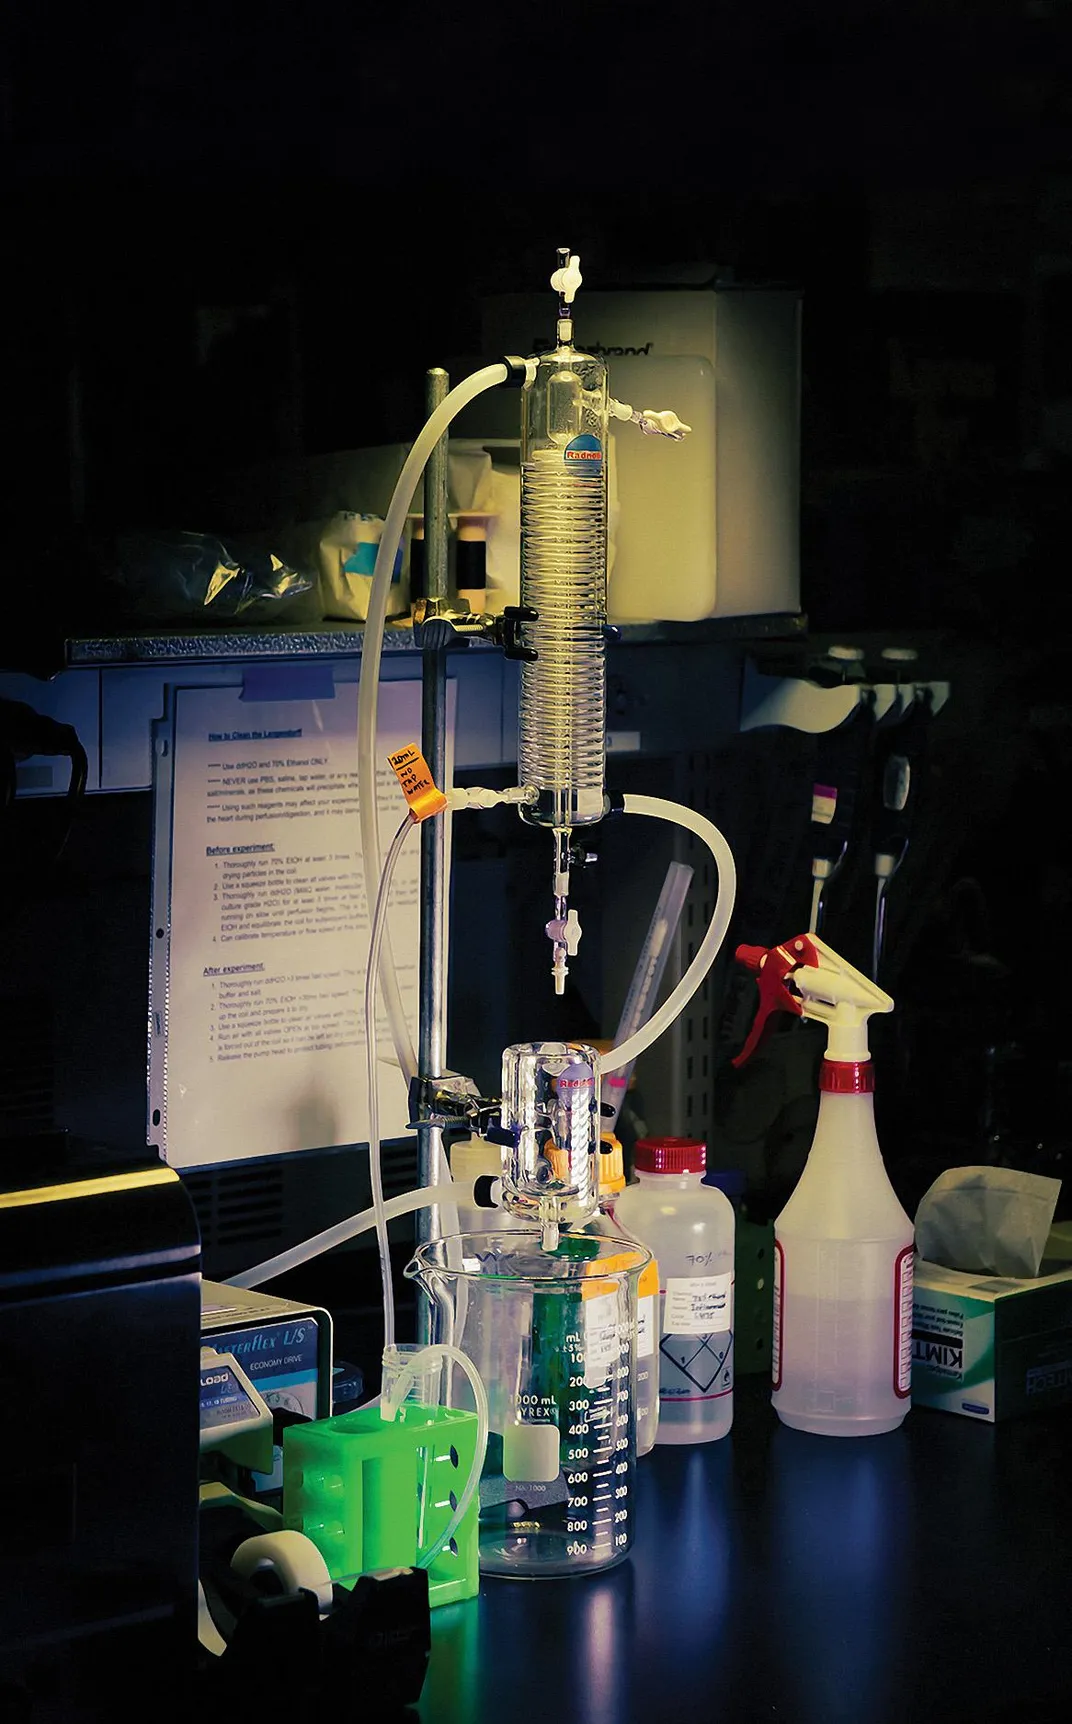 Equipment in Chaudhry’s lab 